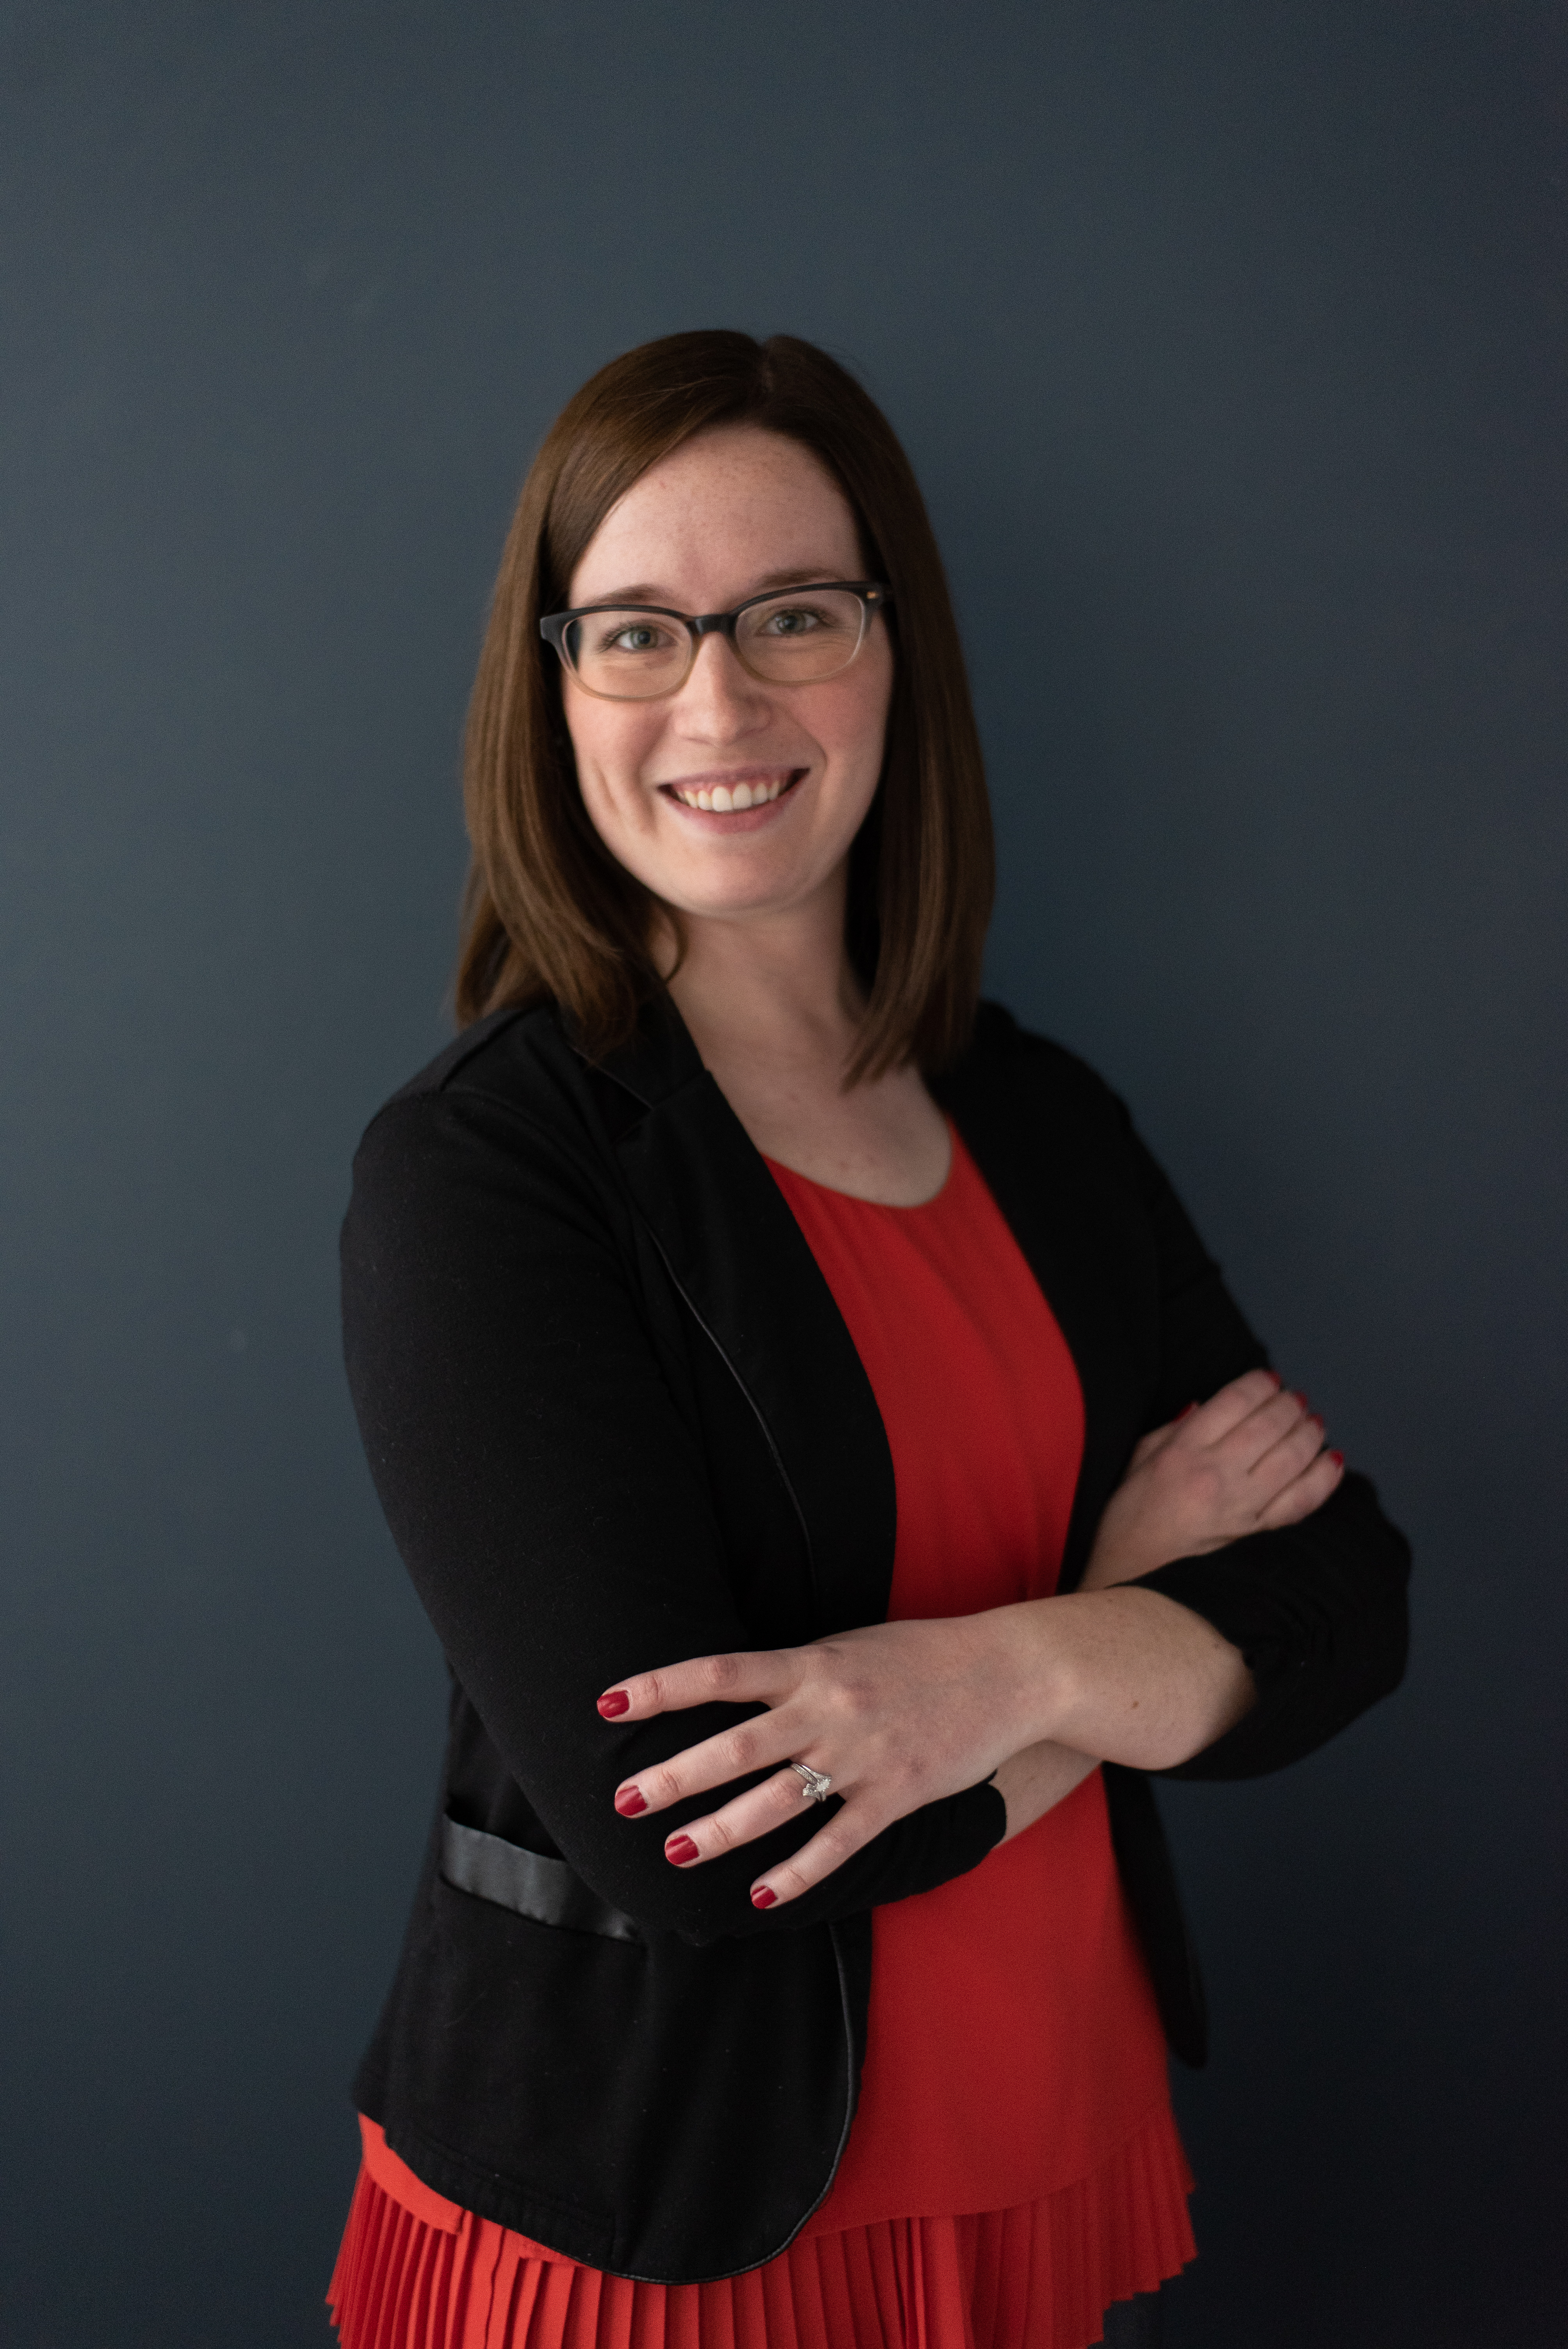 Portrait of Caroline in front of a dark background. In the photo, she has shoulder-length dark brown hair, brown-rimmed glasses, and red-painted nails. She's smiling and wearing a bright reddish-orange blouse with a black blazer.